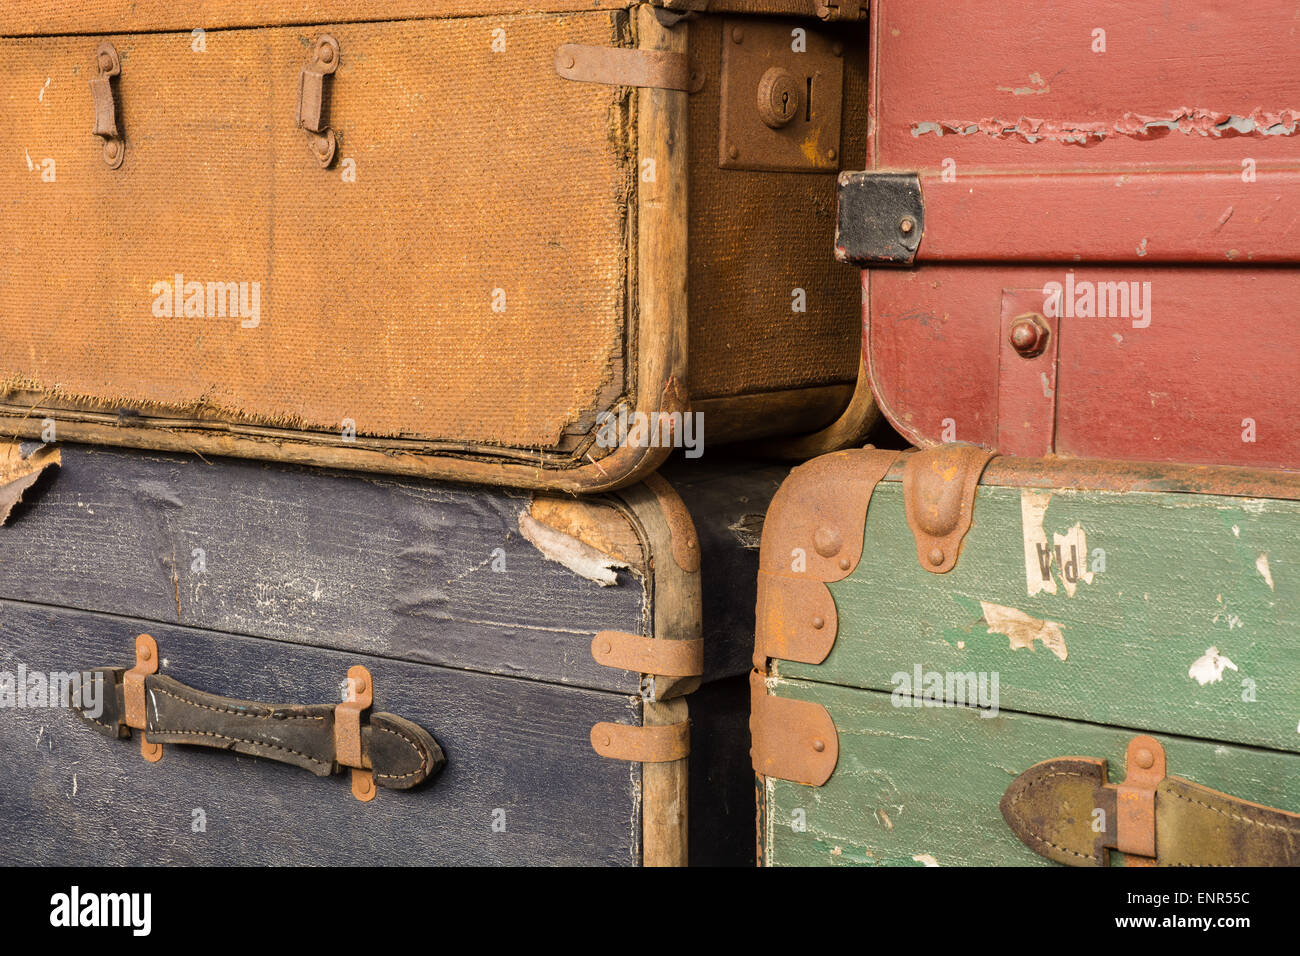 old suitcases on the platform at Bewdley station on the Severn Valley Railway, a heritage railway in England. Stock Photo